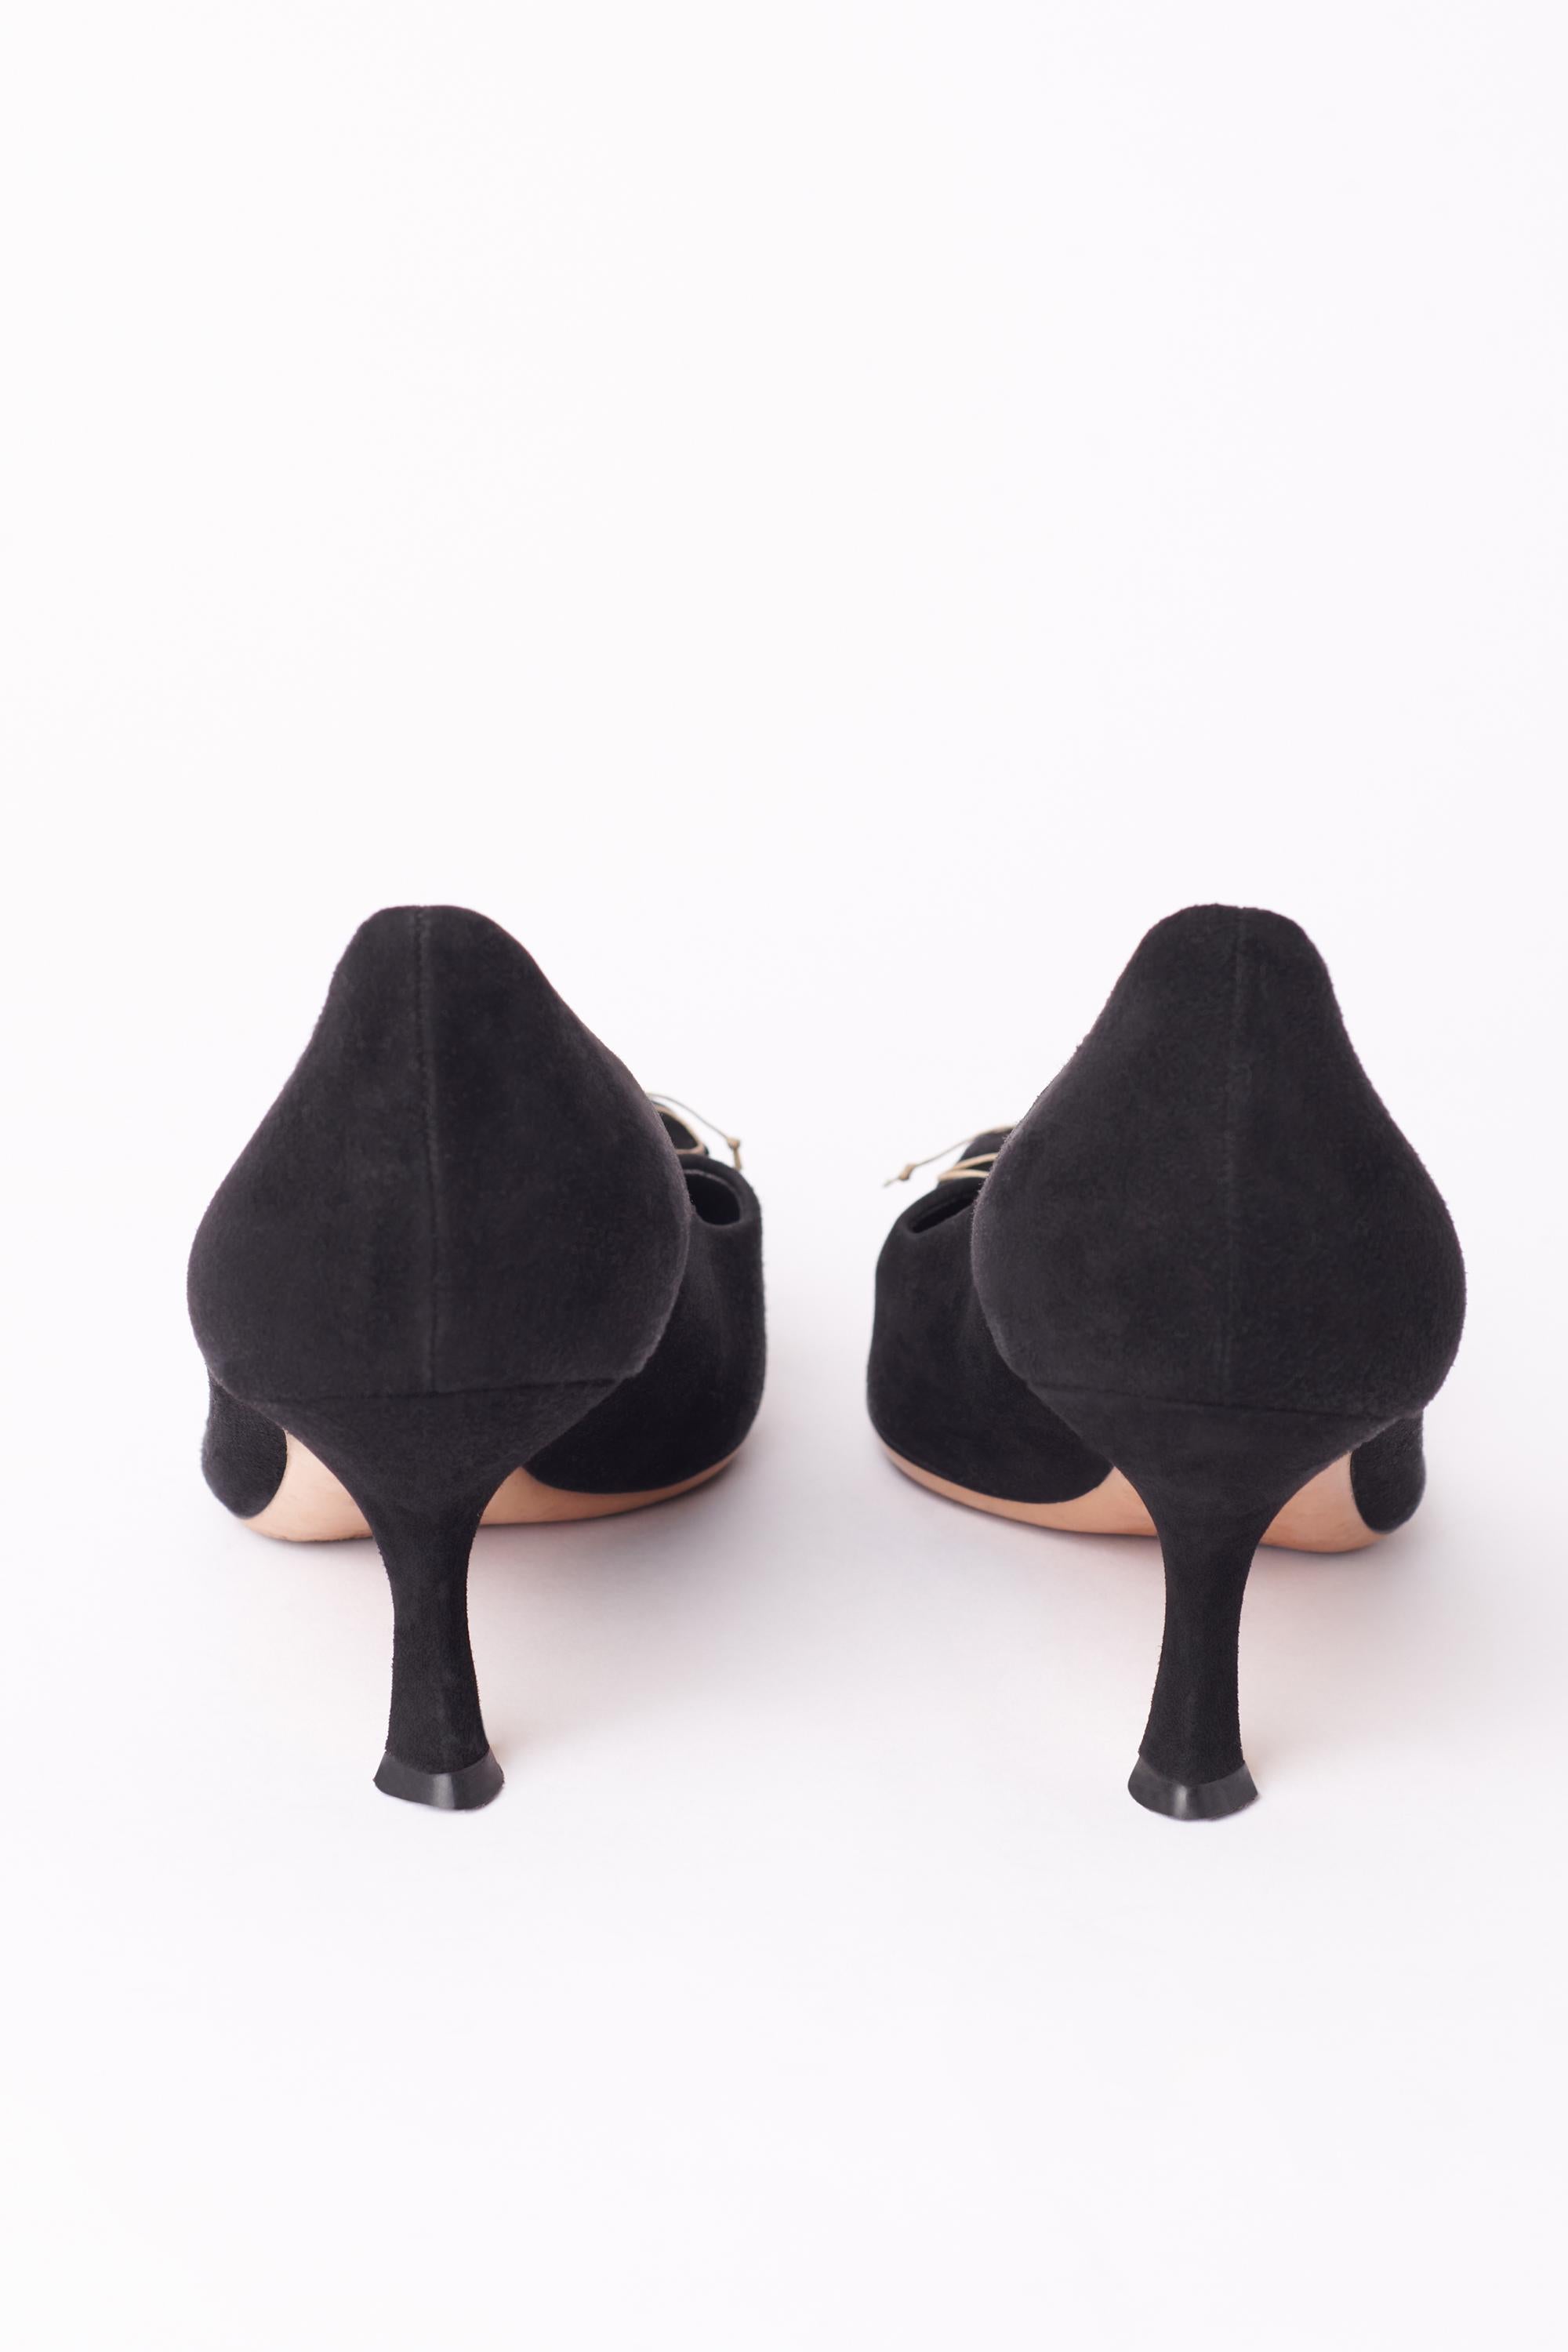 Vintage 2000's black suede pumps heels by Prada. Feature a suede fabric and a kitten heel pointed toe style. Beige thin topstitching with a bow finish at the front. In excellent condition. 
Authenticity guaranteed.

Size: UK5.5
Colour: Black
Tag